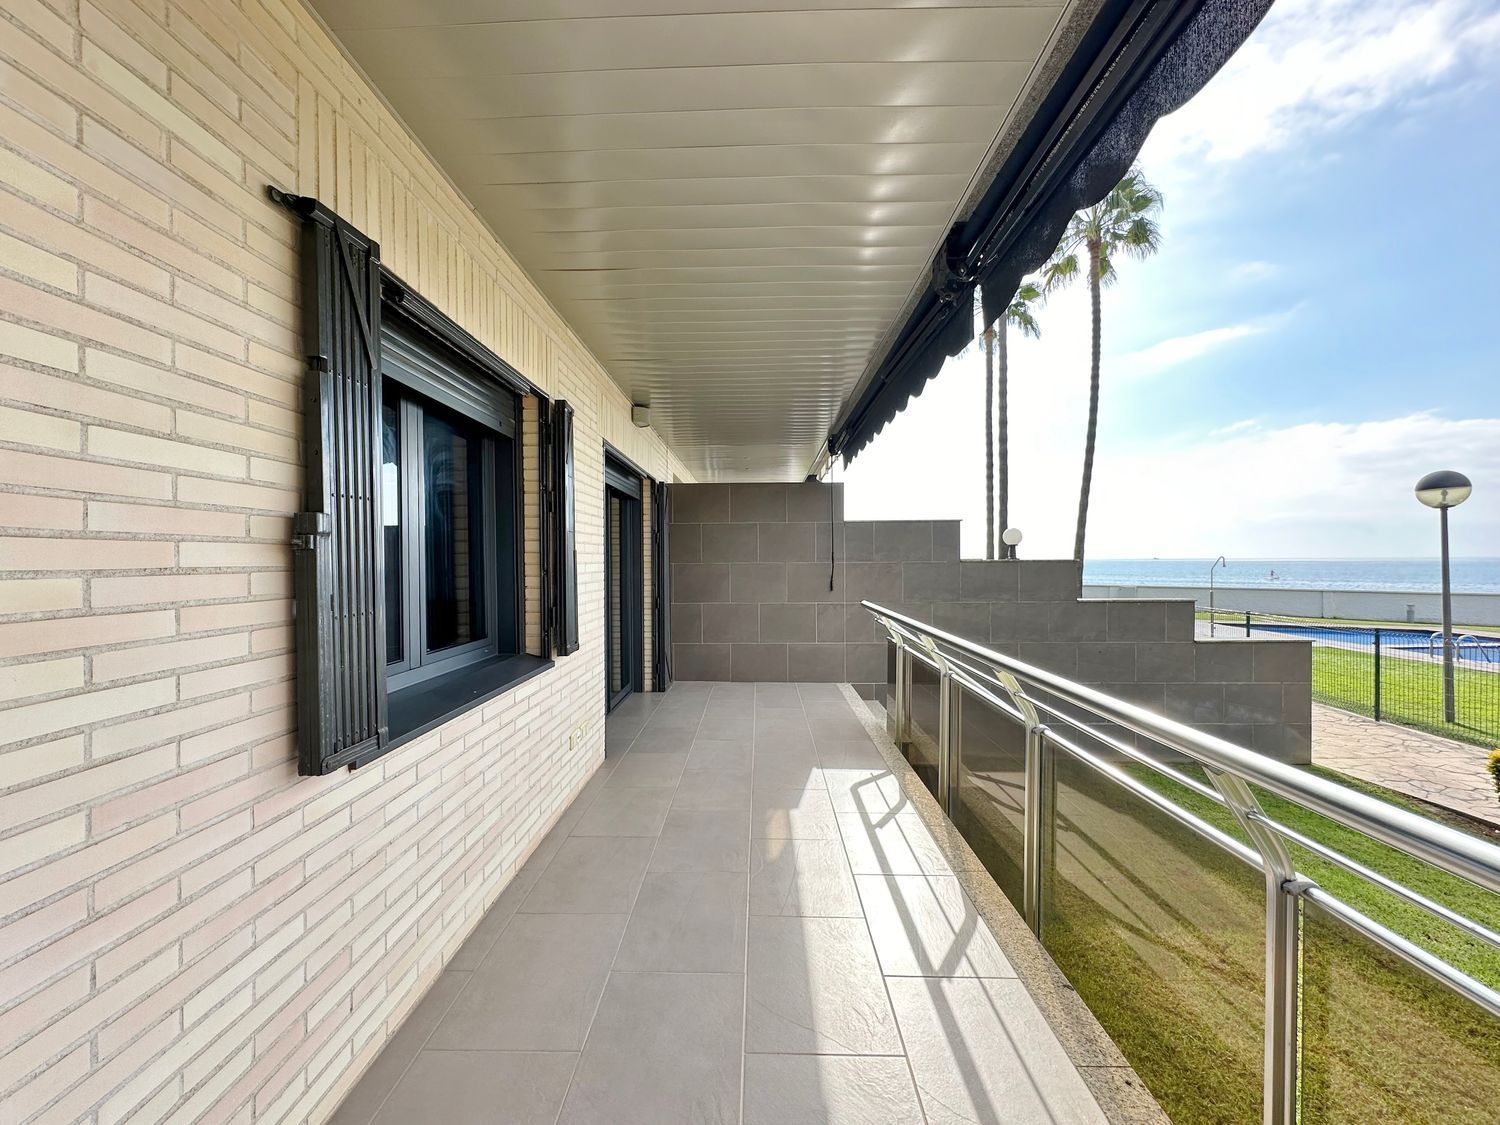 Ground floor for sale on the seafront on Carrer de les Barqueres, in Miami Playa